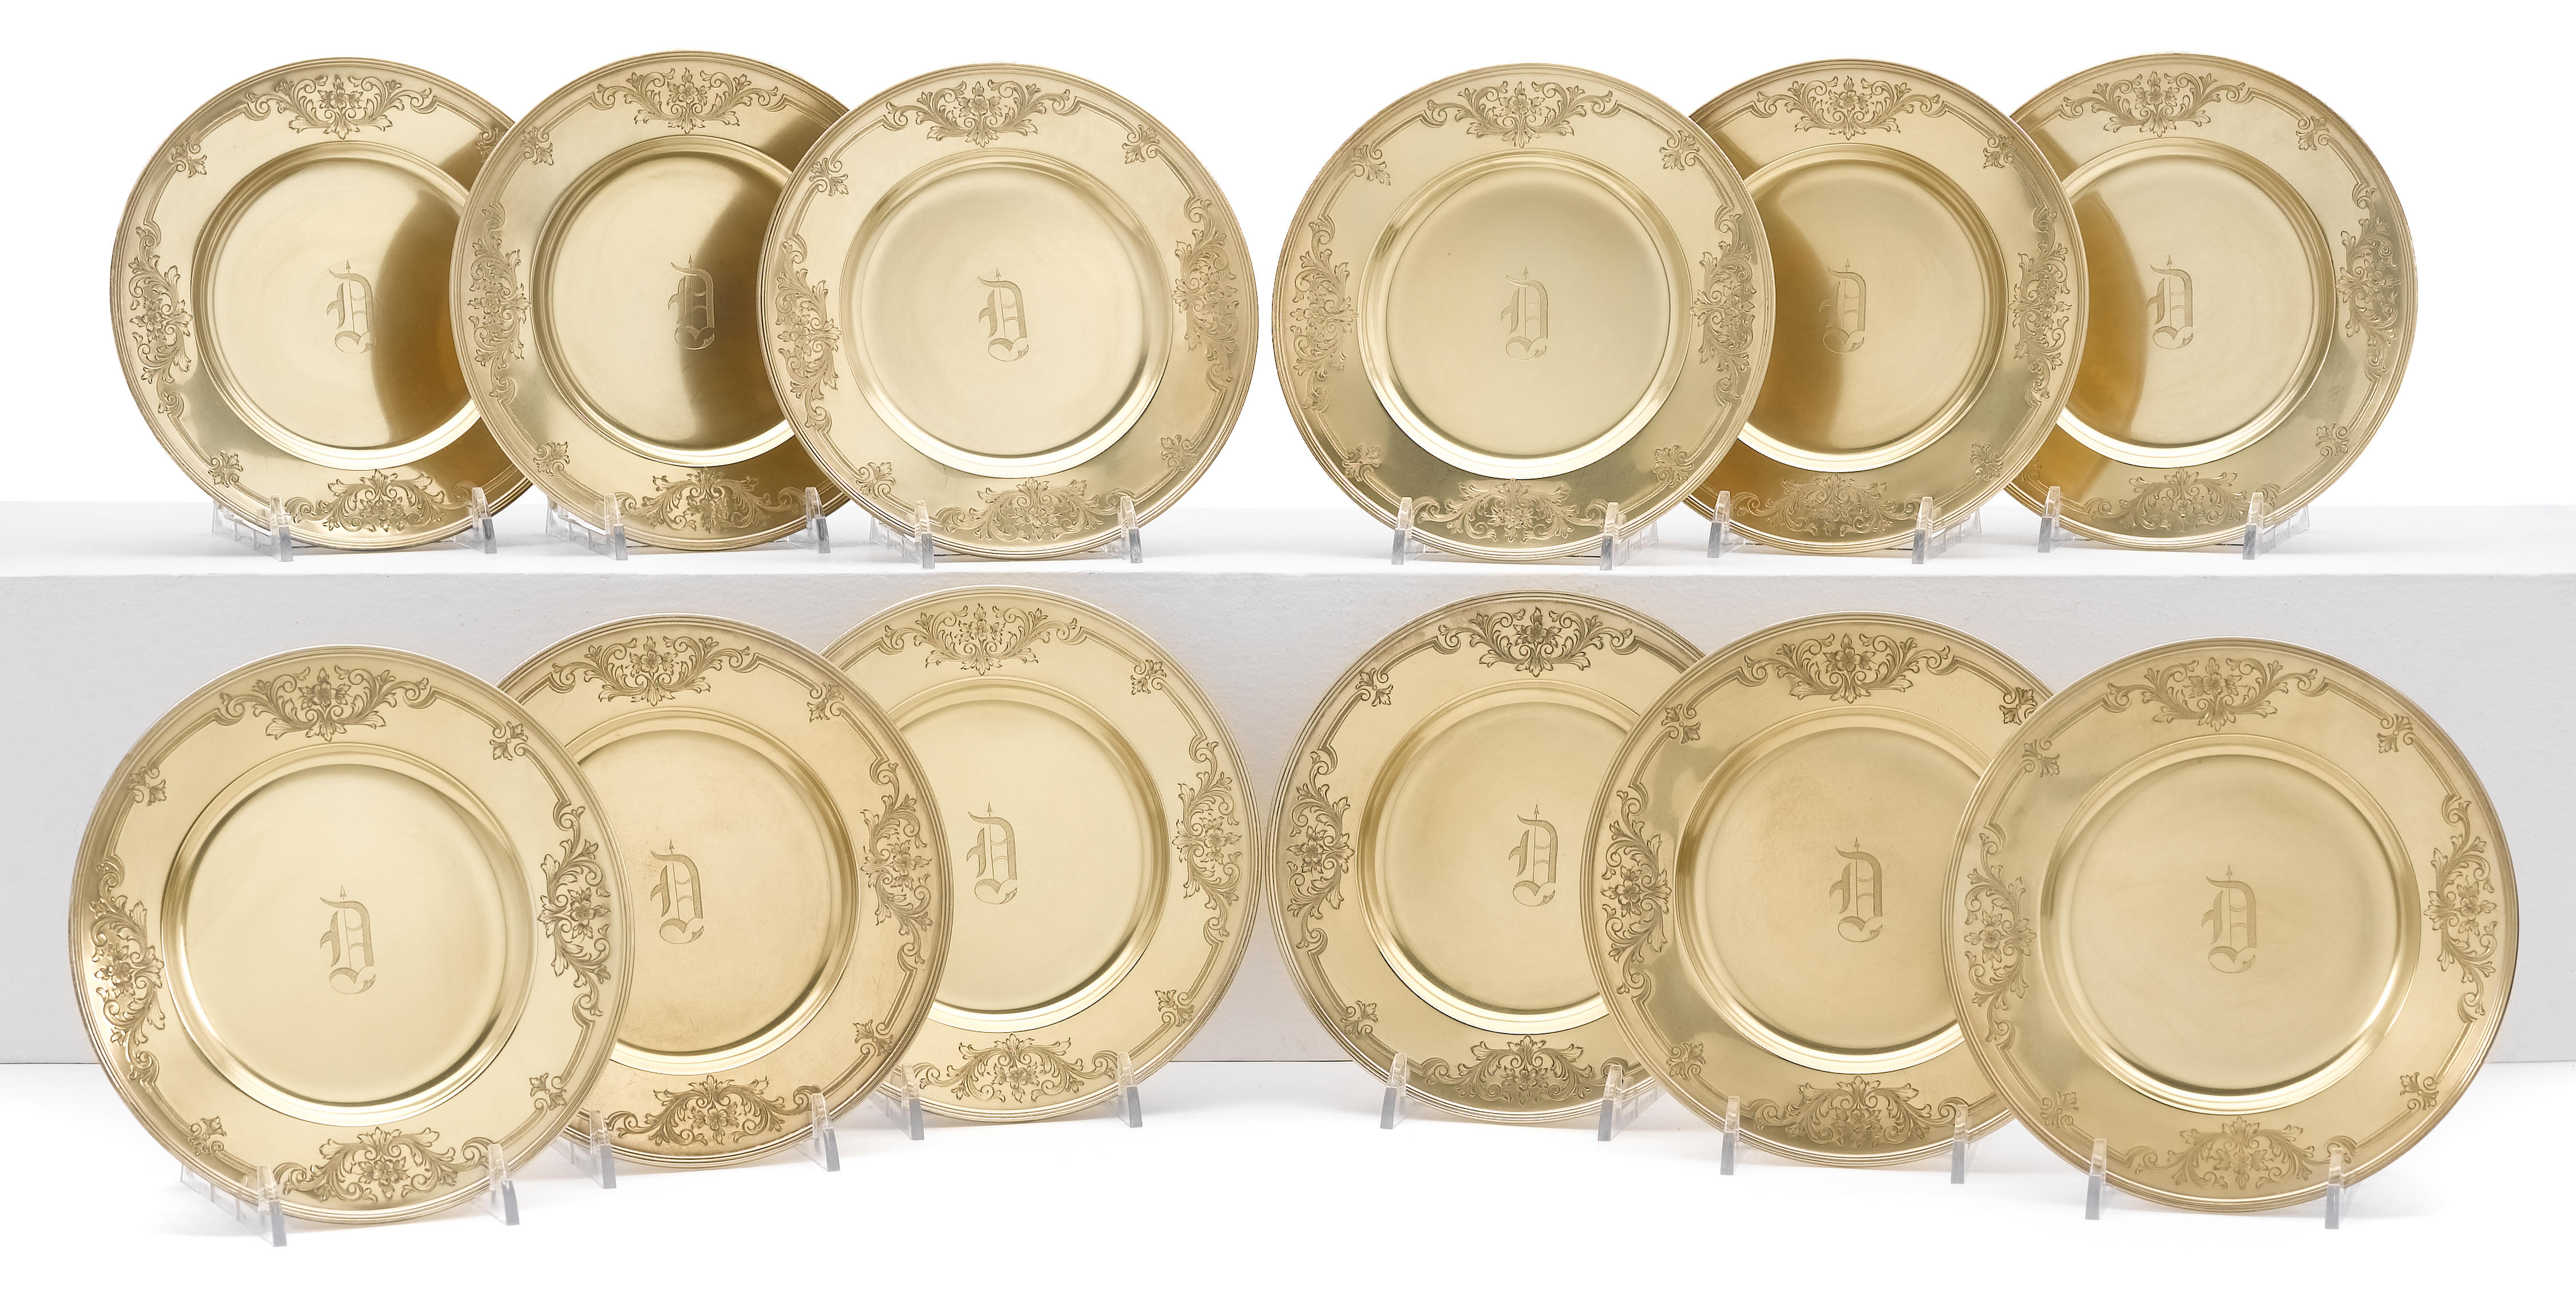 A sterling-gilt set of thirty six